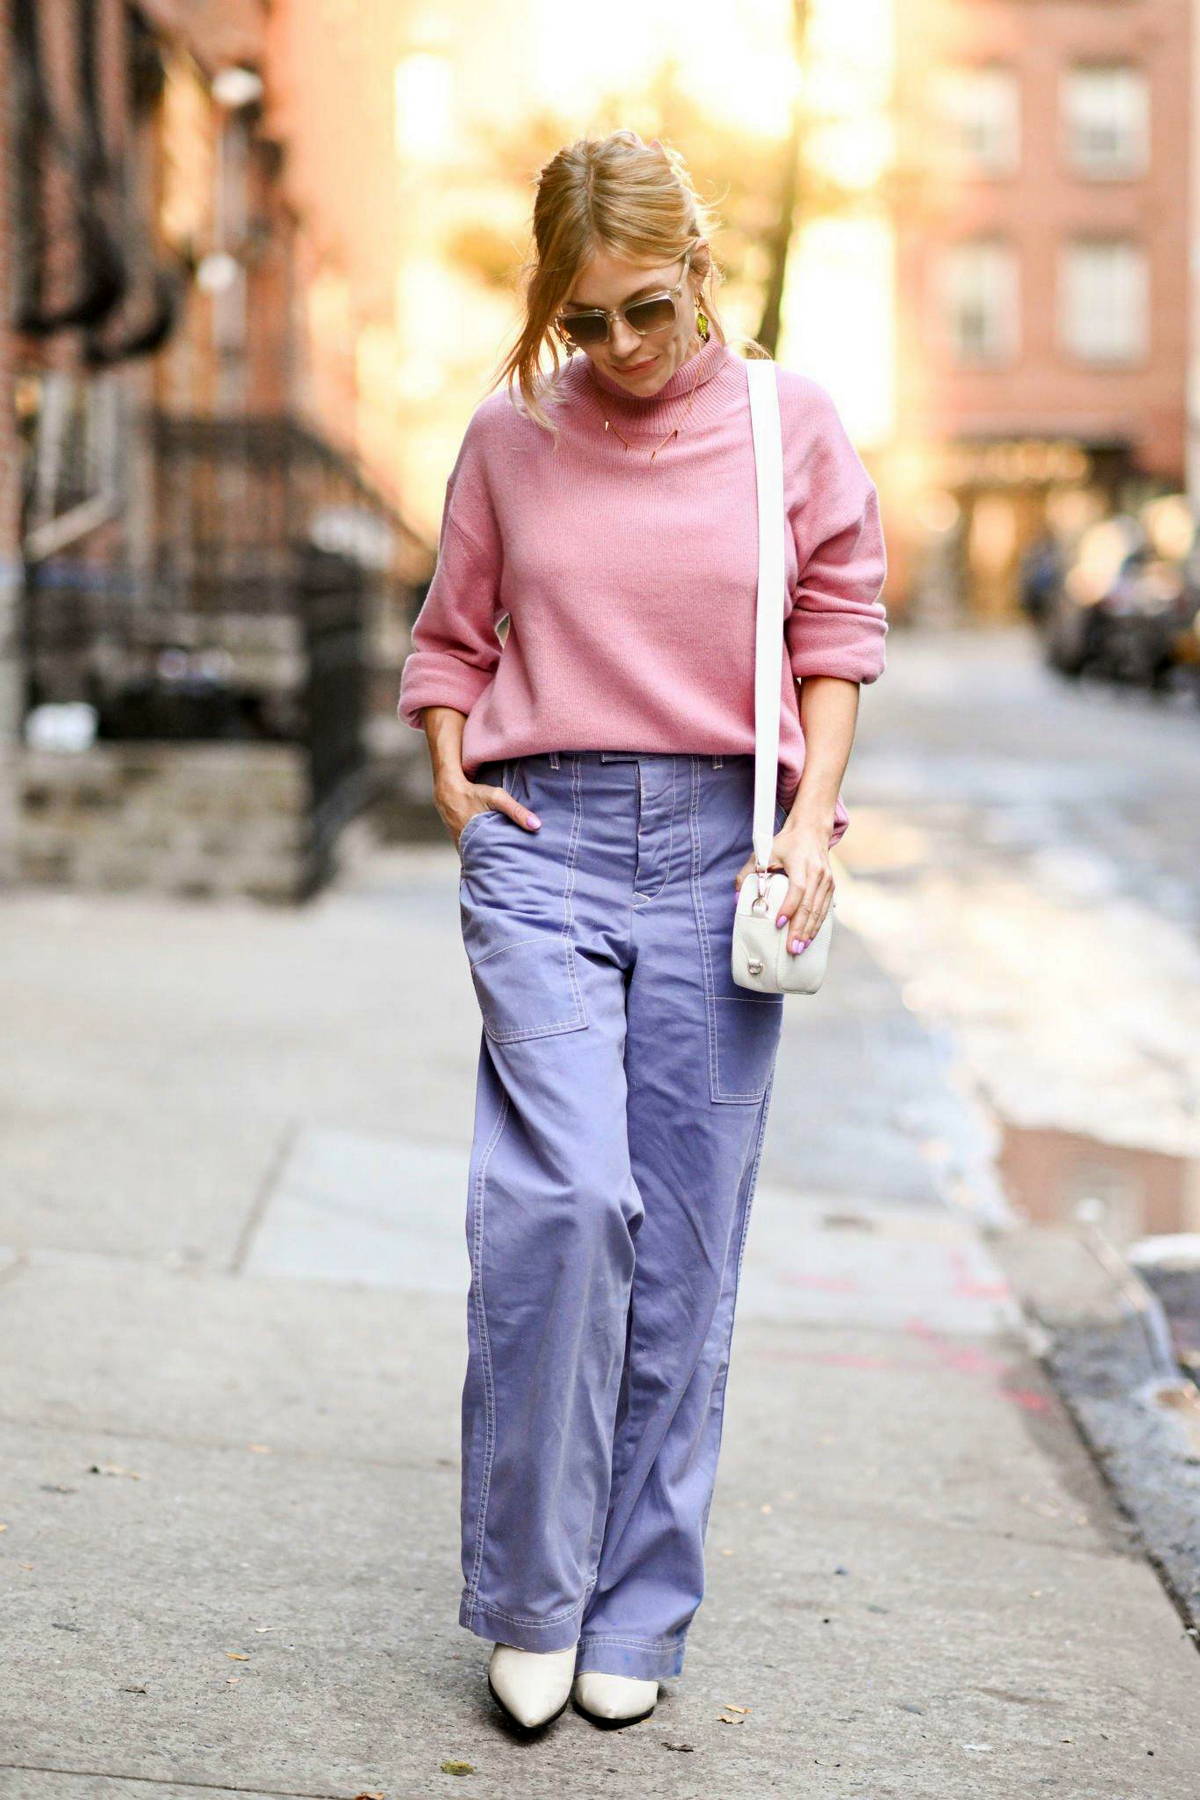 sienna miller looks pleasant in a pink sweater and lavender pants while out  running errands in new york city-011122_5